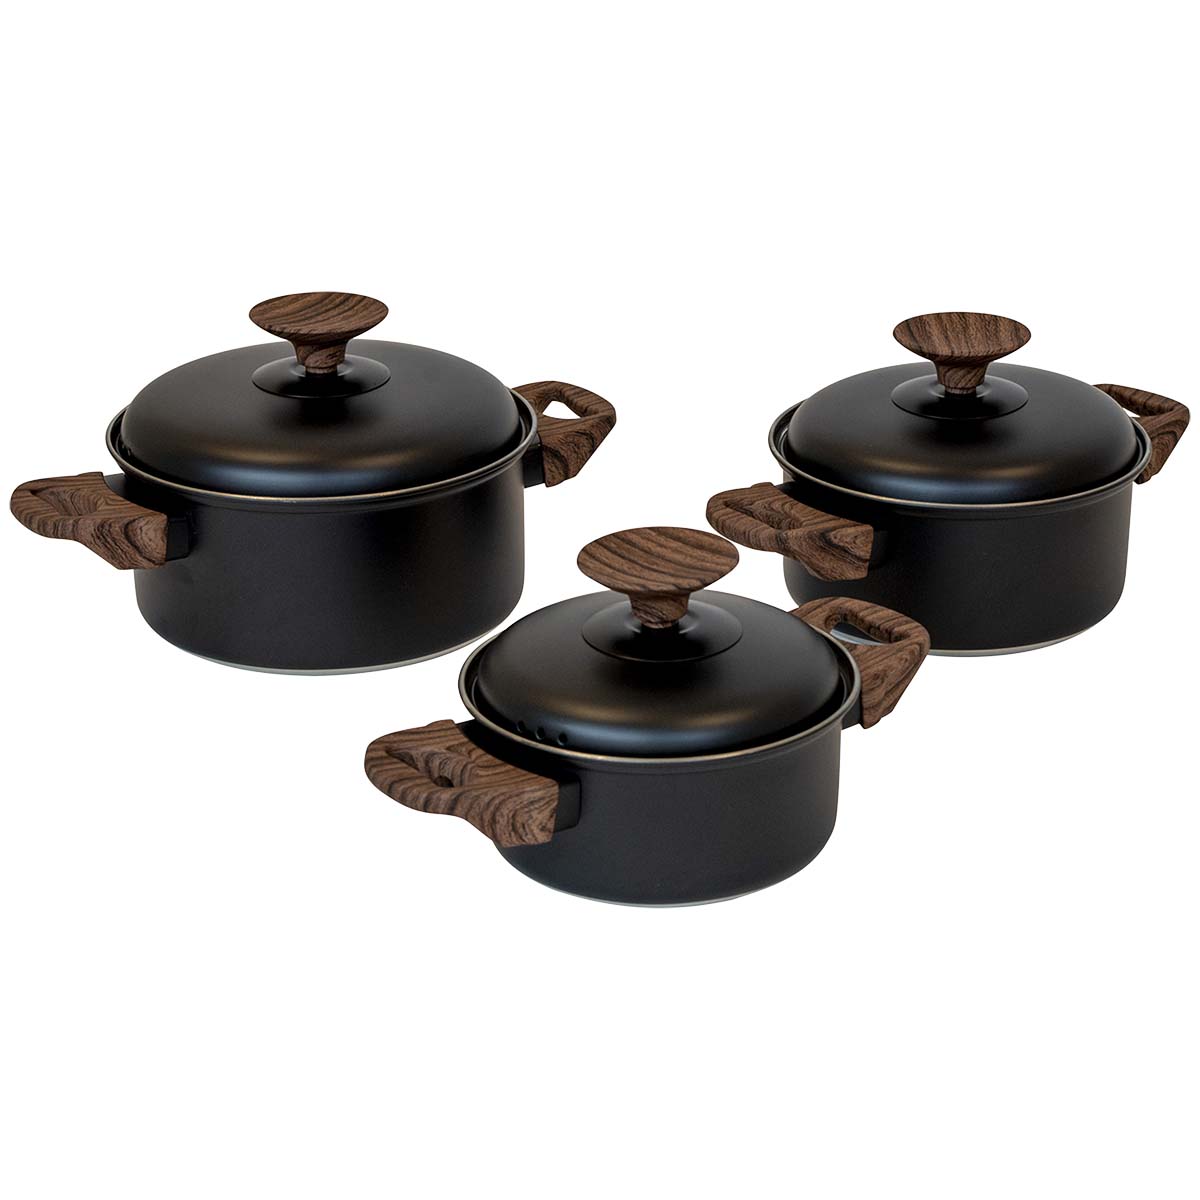 2100972 A 3-part low cookware set. These cooking pans are equipped with sturdy and heat-resistant hand grips and a heat-resistant knob on the lid. The pans have an industrial look because of black stainless steel and the woodlook buttons. Can be used on gas, ceramic and electrical heat sources. Dimensions (Øxh): 14x7, 16x8 and 18x9 cm. Contents: 1,1, 1,6 and 2.3 litres.